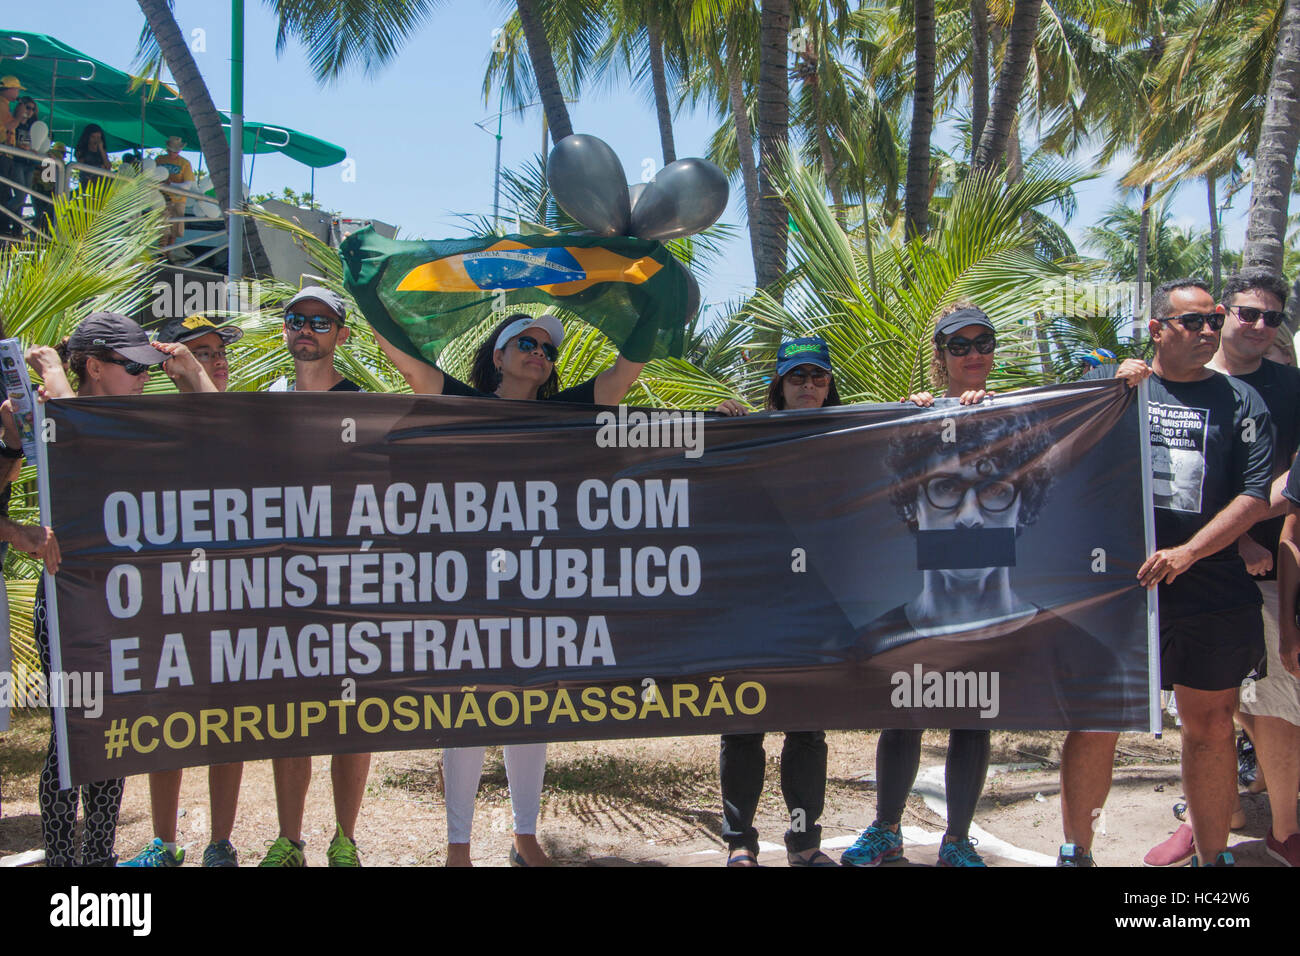 Porto Alegre, Brazil. 04th Dec, 2016. Convened by the movements come to the street and Brazil Free, a national demonstration against corruption on Sunday in Singapore, had the support of weight, servers and promoters of the judiciary, outraged by the Brazilian political class. Many people went to Alagoinha in Ponta Verde waterfront with flags and posters protesting against corruption. © GUIDO JR./FotoArena/Alamy Live News Stock Photo